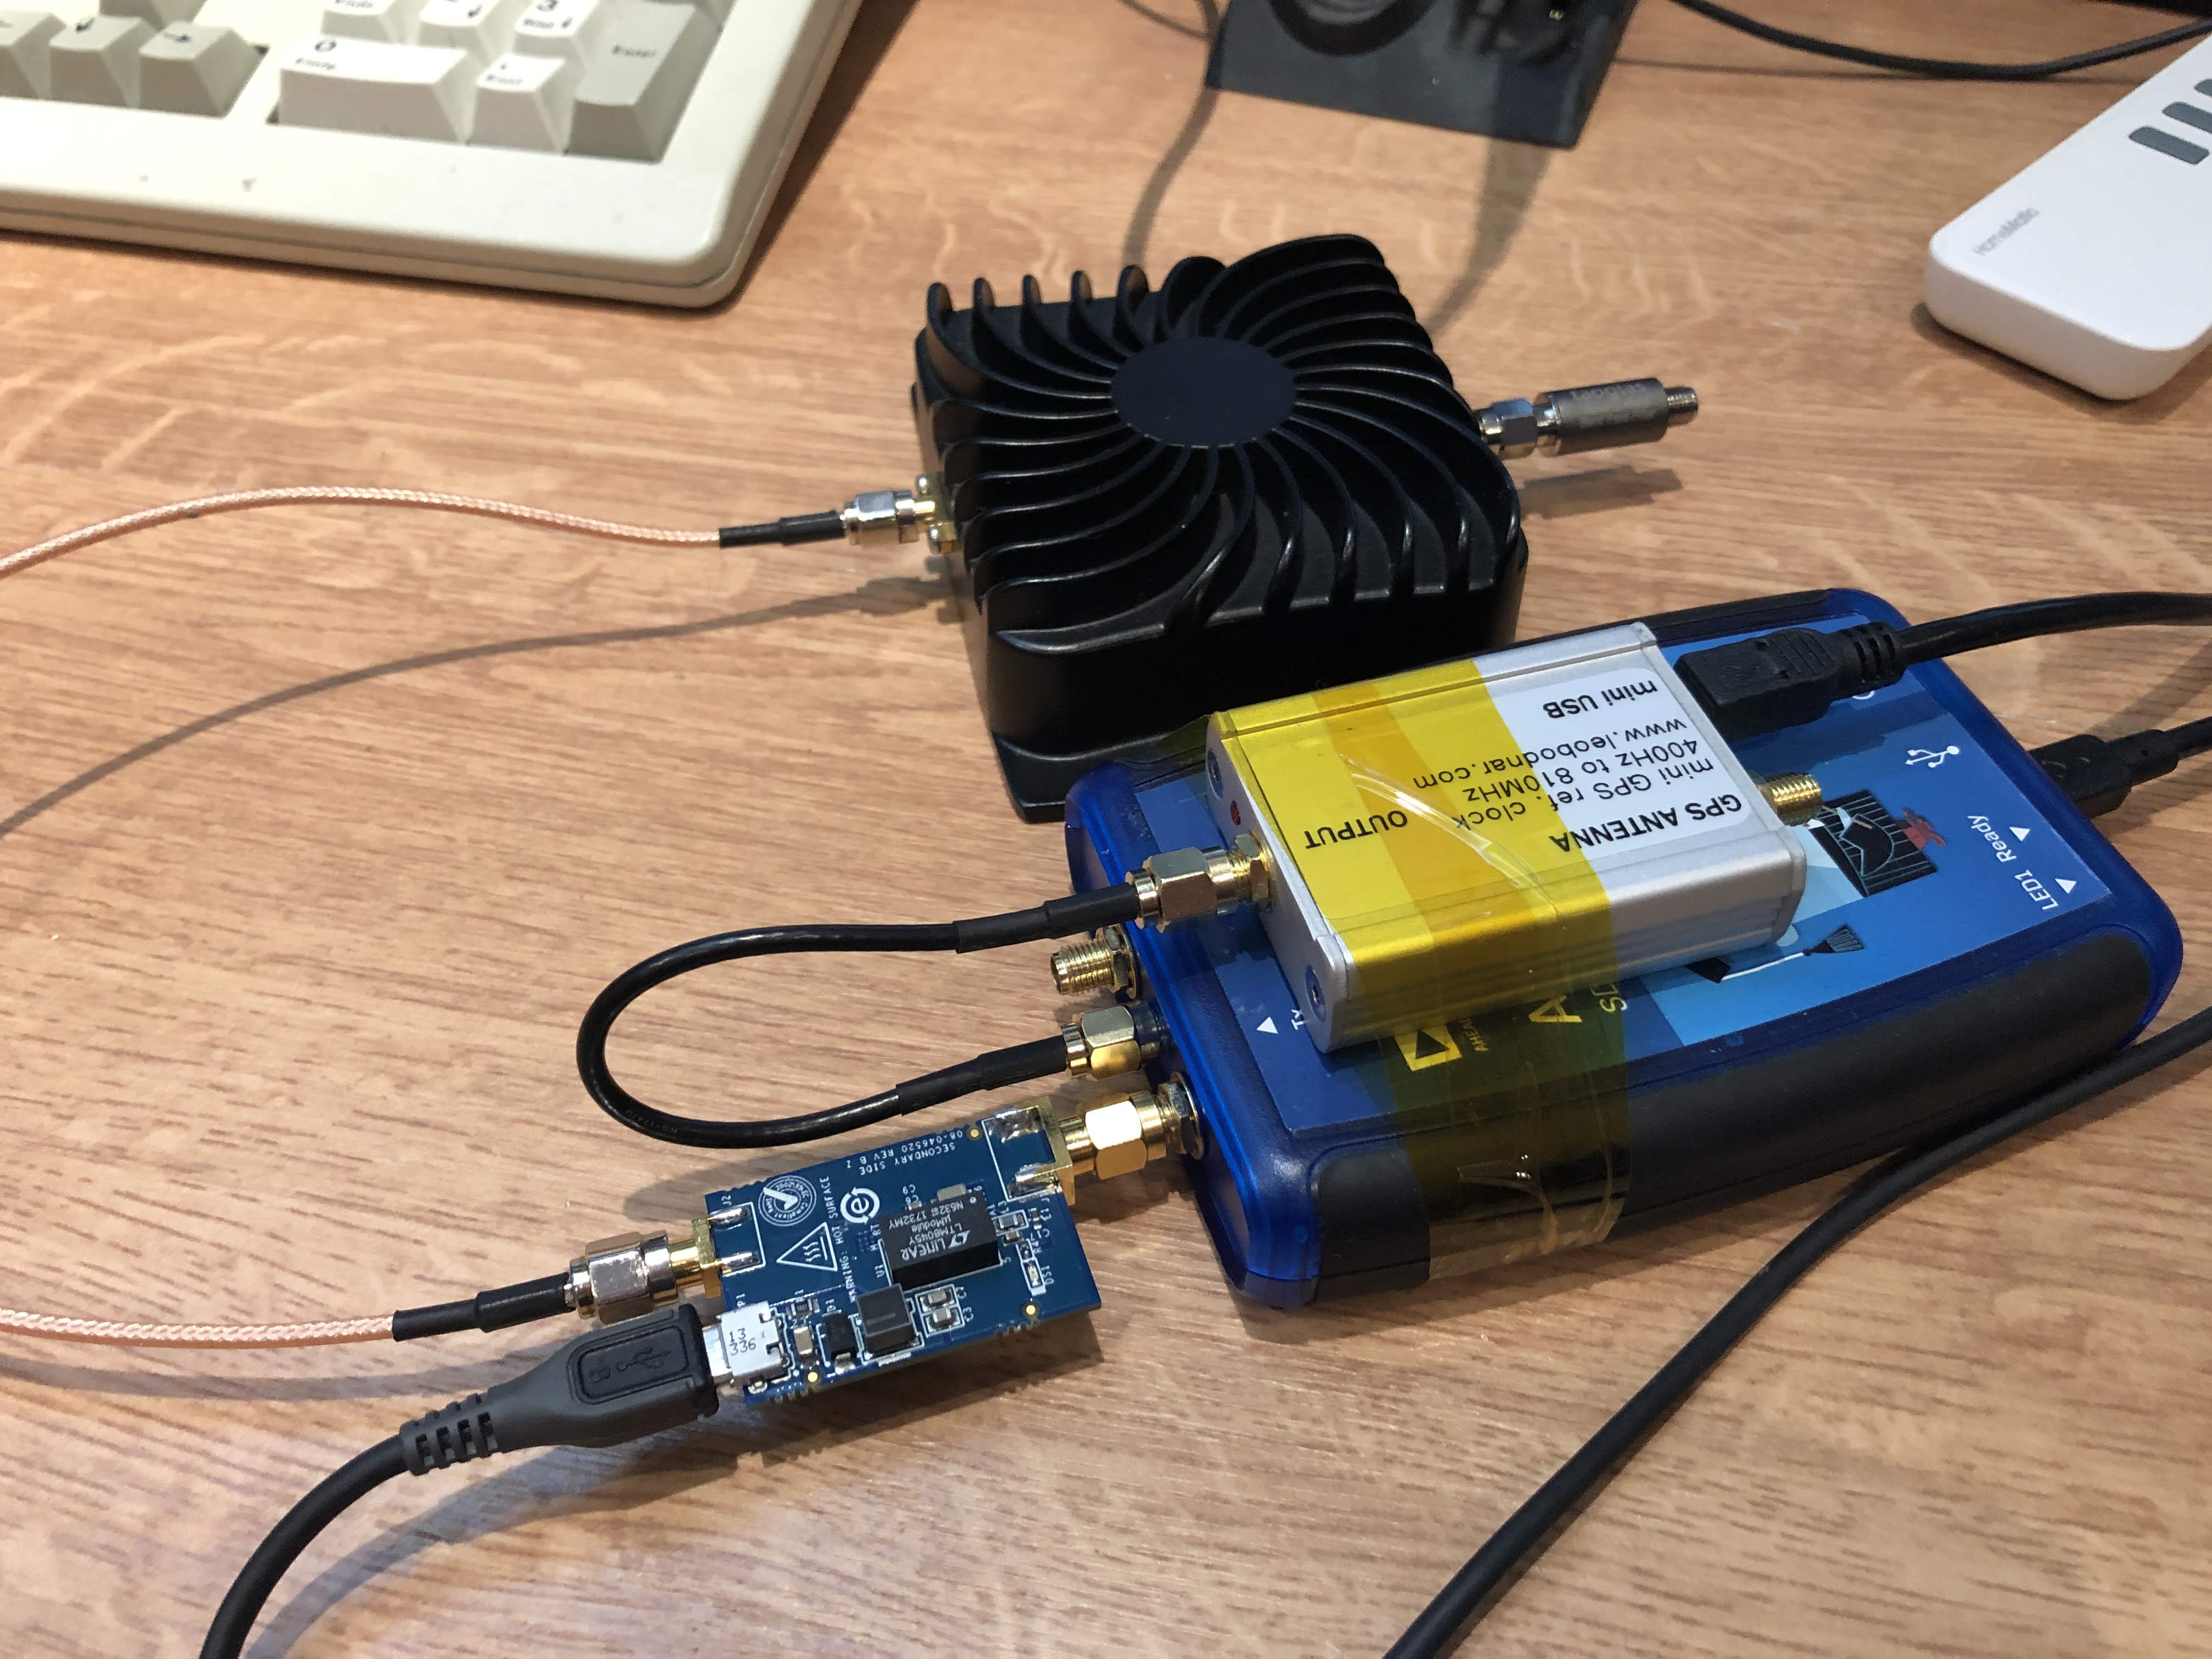 PlutoSDR setup, with GPSDO, CN0417 amplifier and WiFi booster